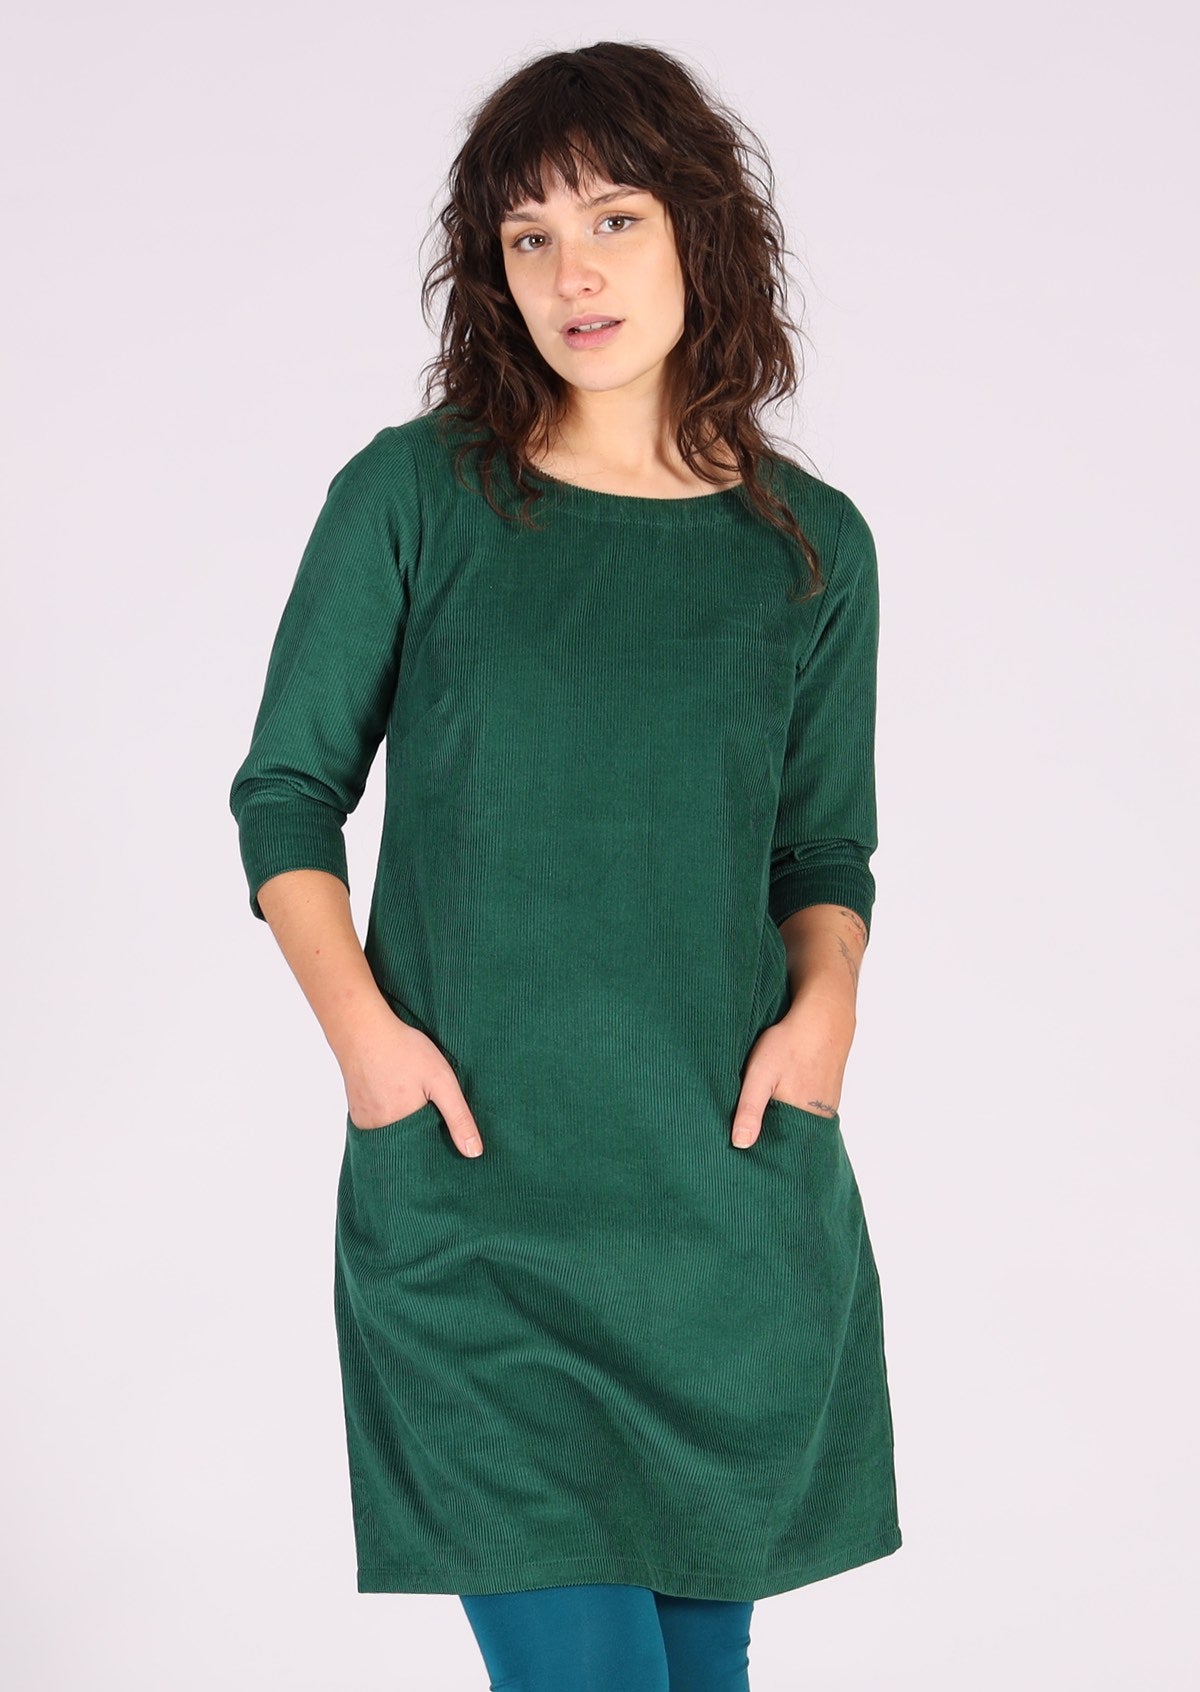 Cotton corduroy dress with A-line skirt